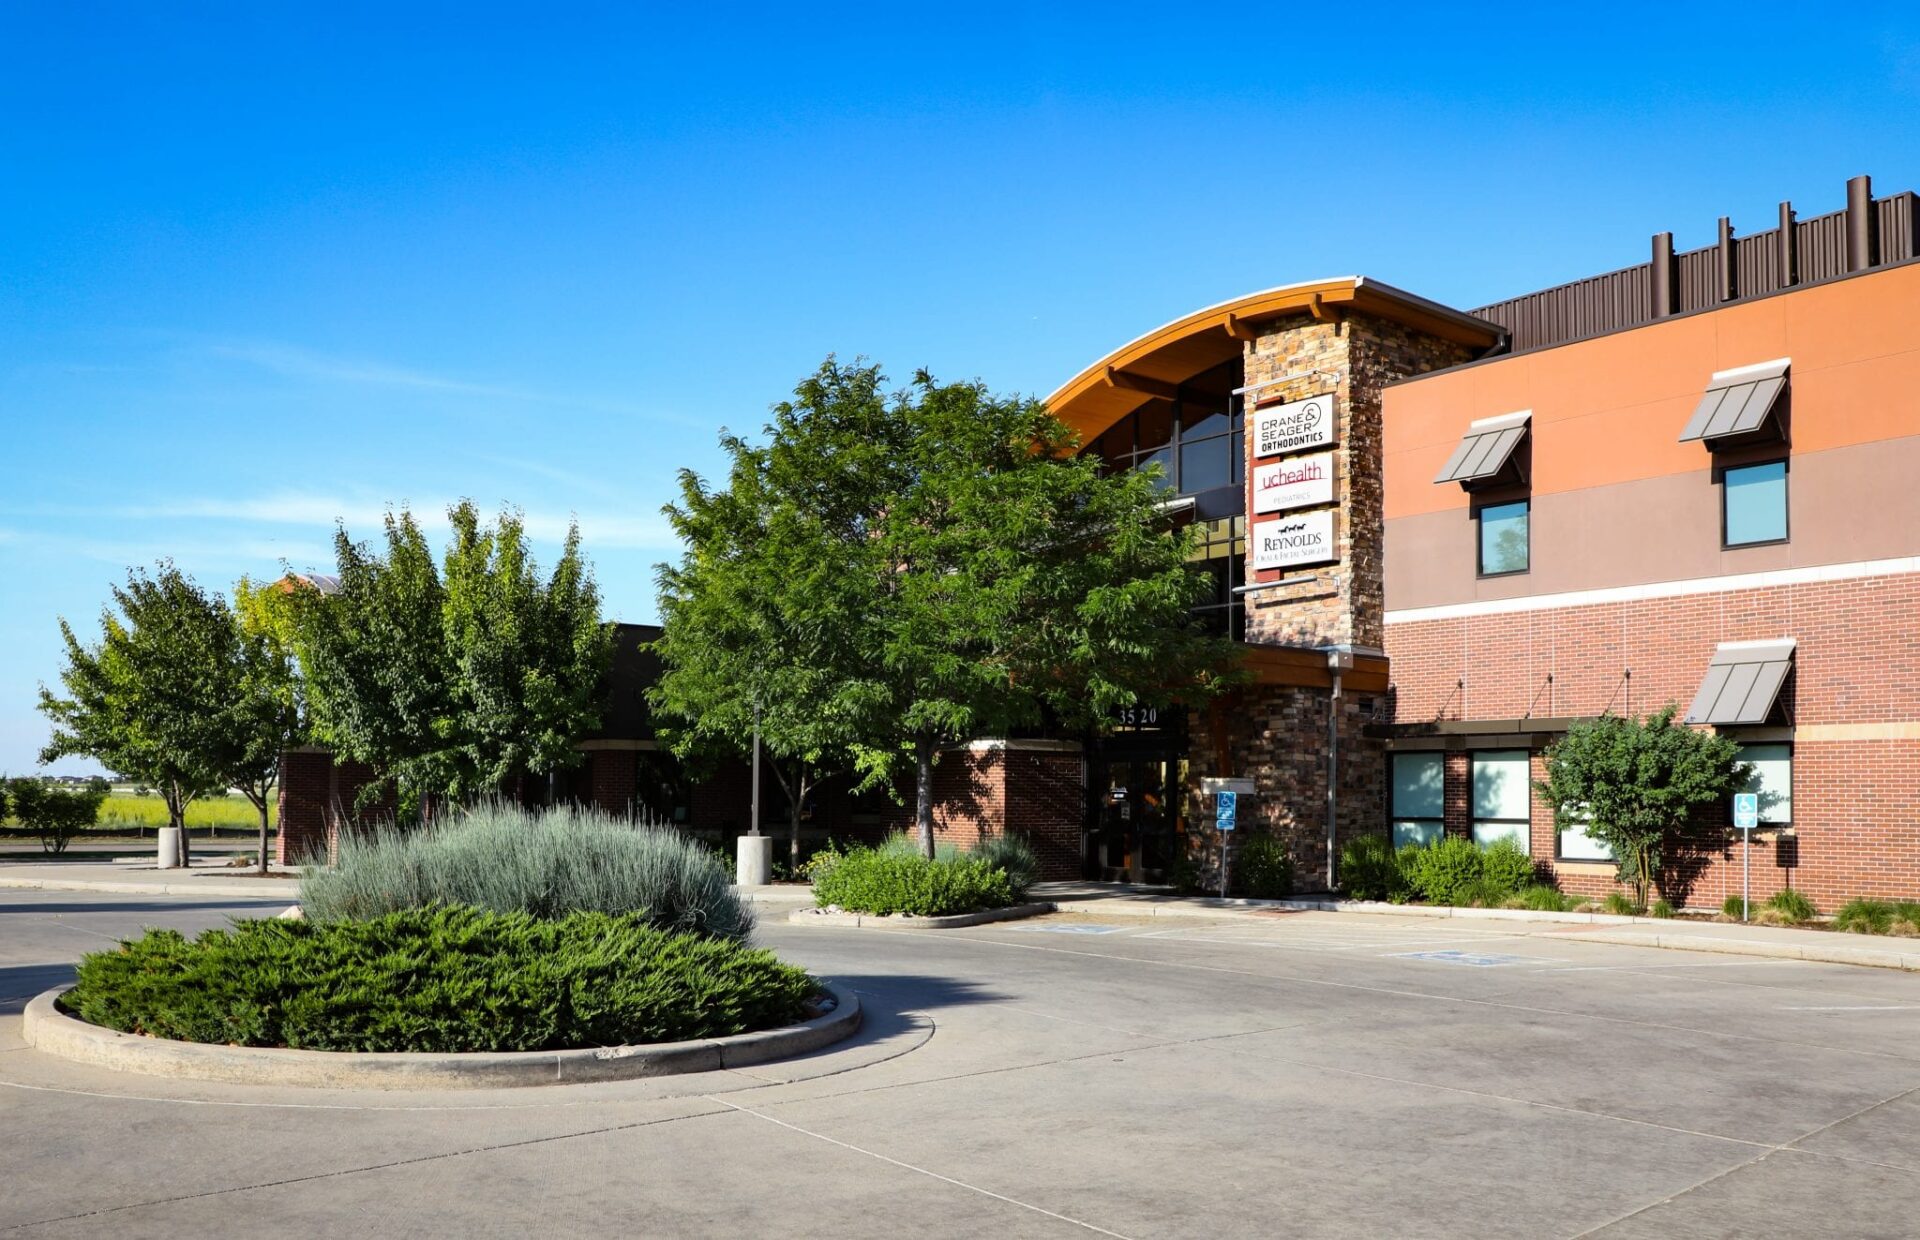 Dental care office exterior | Crane & Seager Orthodontics in Fort Collins and Loveland, CO